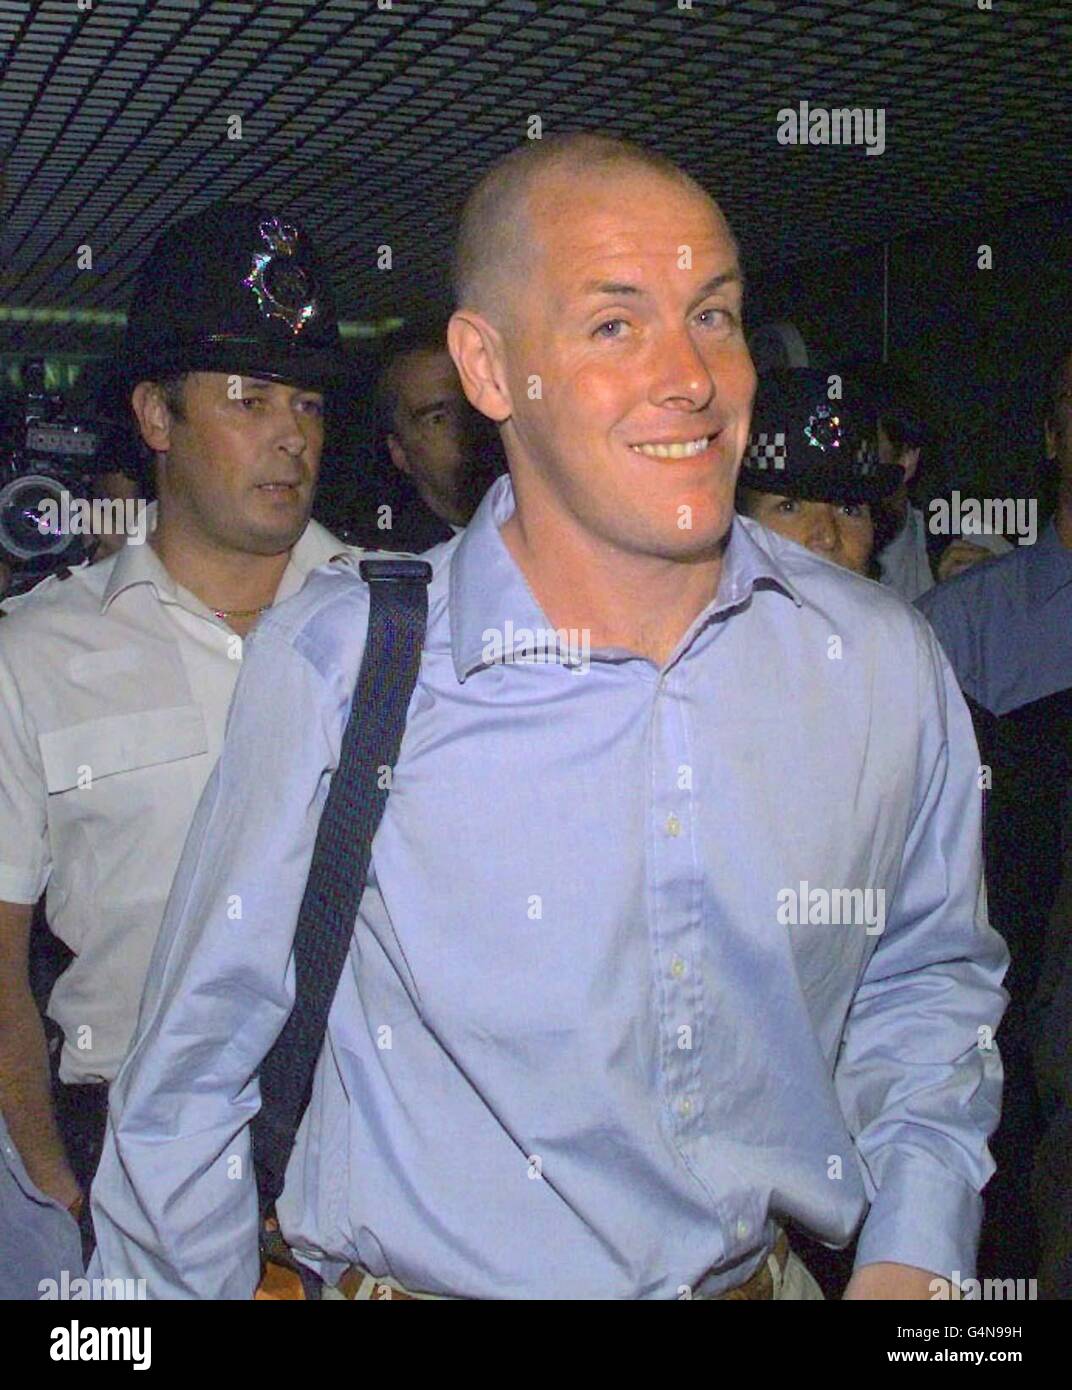 Rogue trader Nick Leeson, who brought down Barings Bank, makes his way to a news conference at London's Heathrow airport. The day after Leeson was released from a Singapore jail. Stock Photo